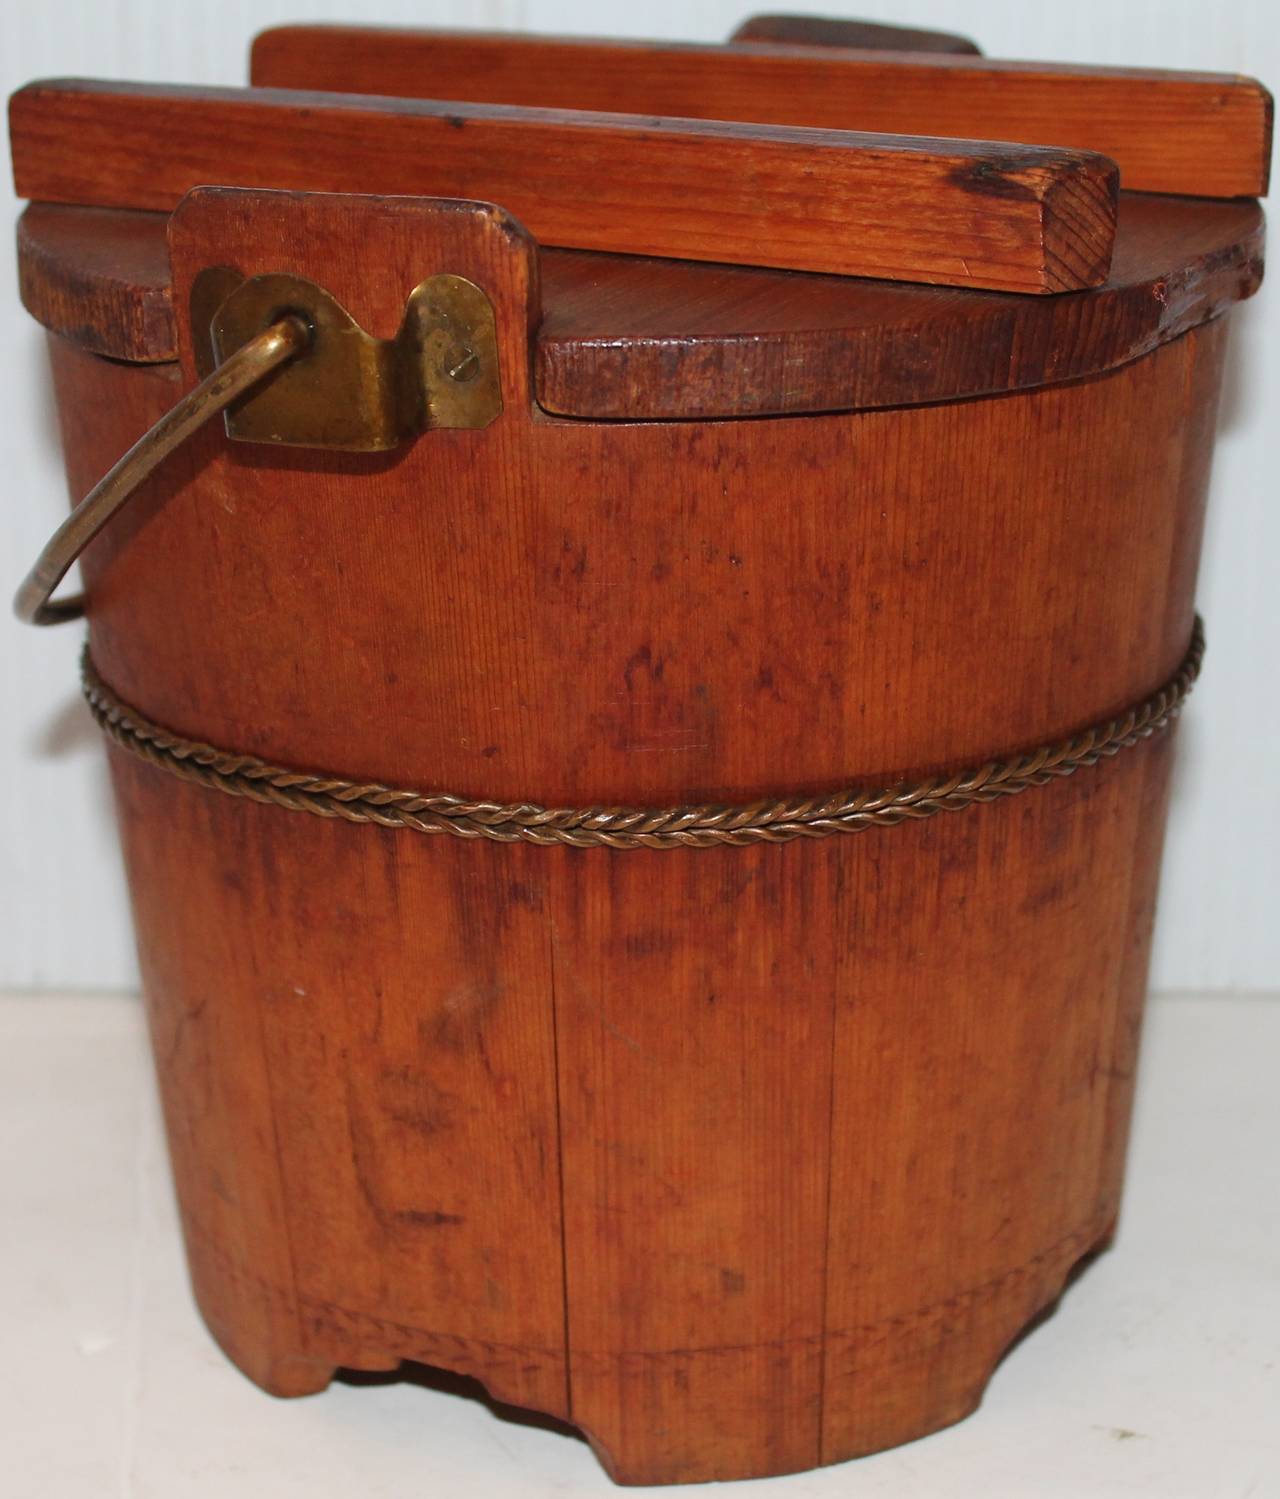 This unusual 19th century pine sugar or grain bucket has the original metal handle and twisted metal trim. The base has very unique cut-out throughout. The lid is original to the piece. The piece is in very good condition.